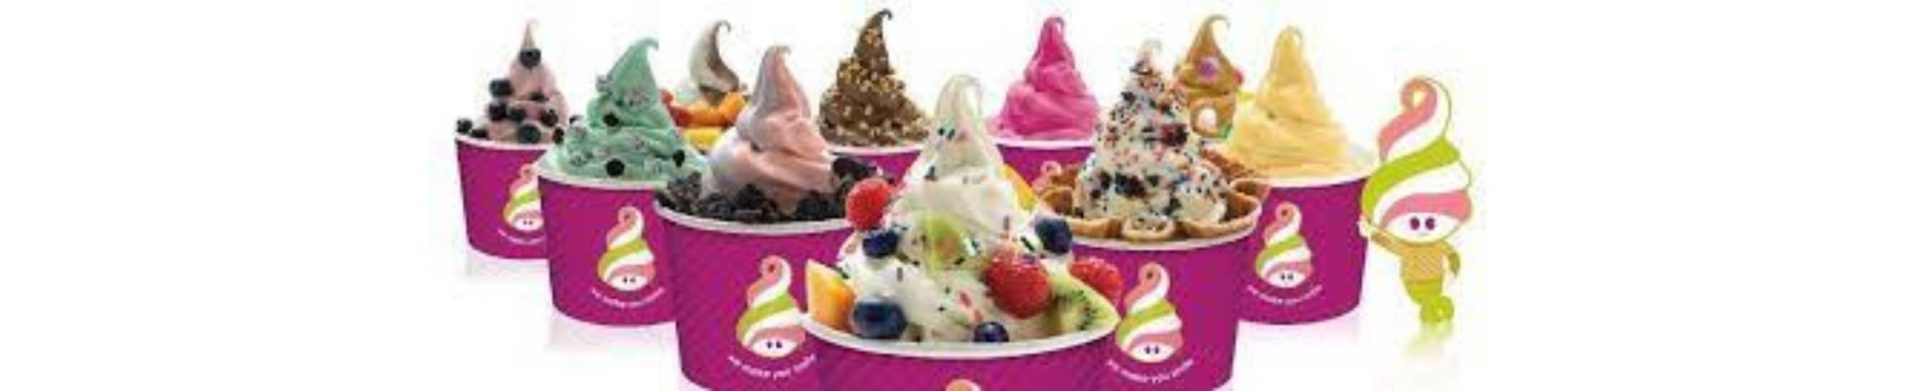 Menchie's froyo selections in pink cups